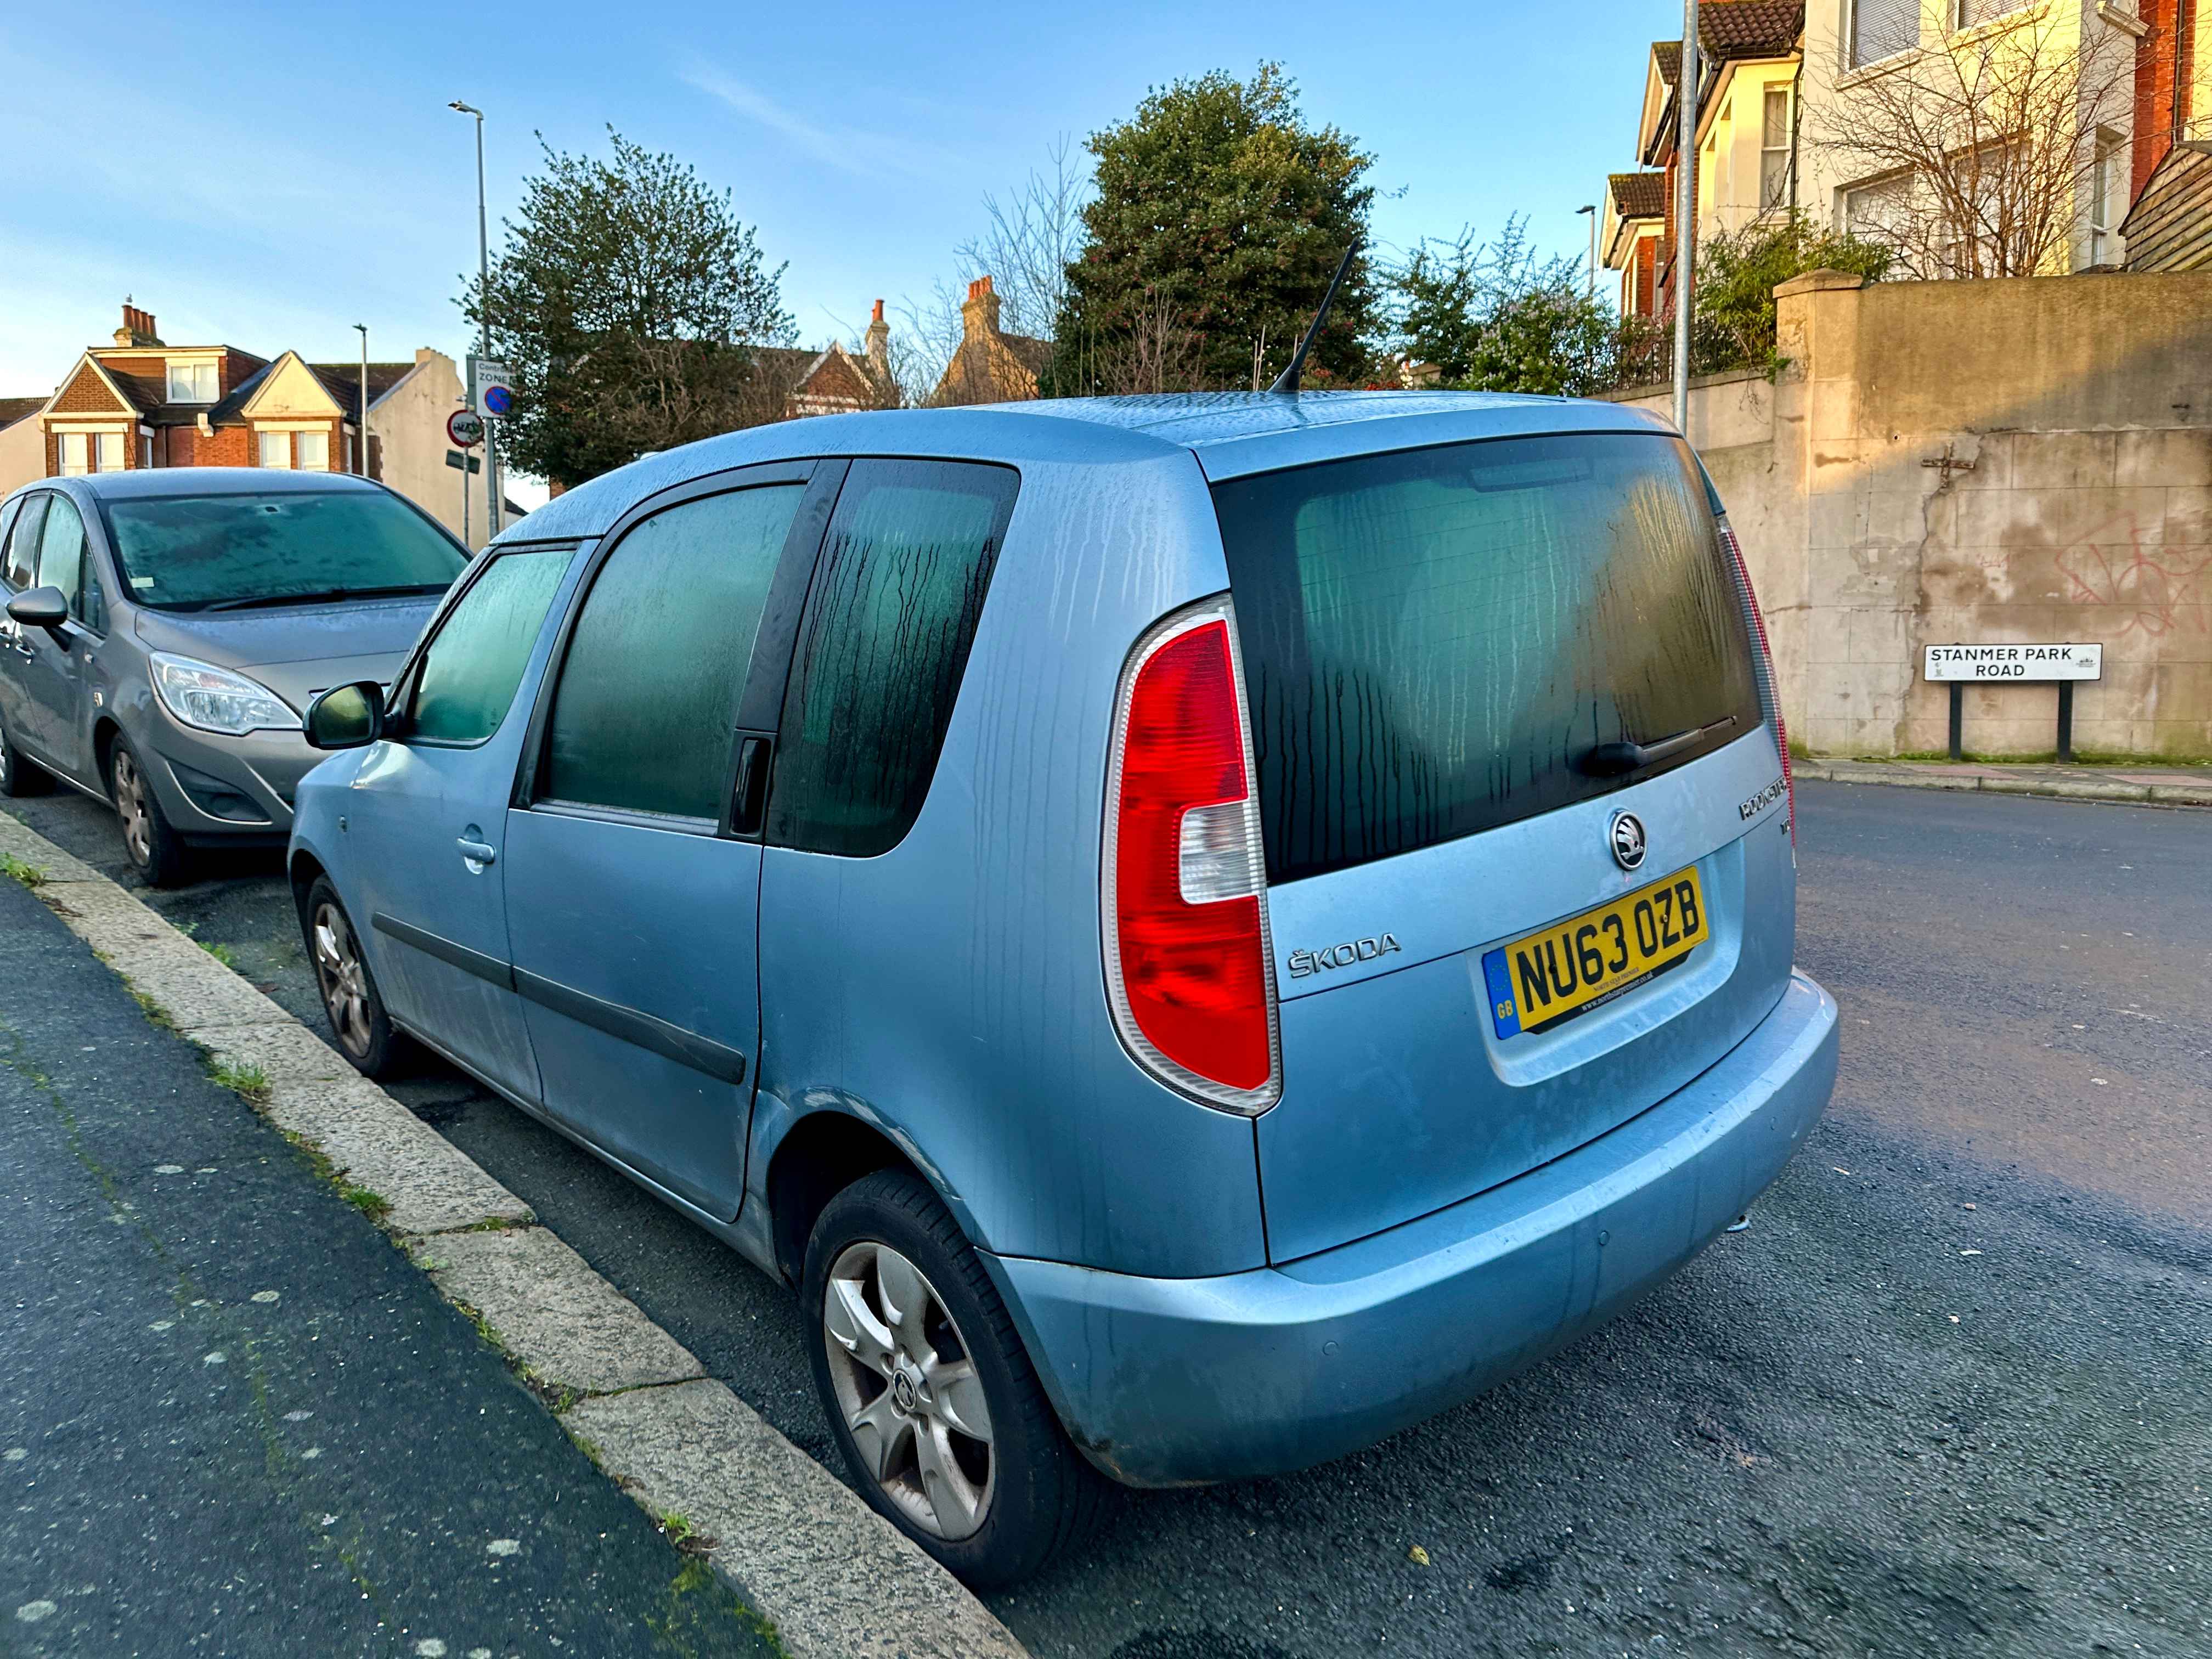 Photograph of NU63 OZB - a Blue Skoda Roomster parked in Hollingdean by a non-resident. The fourteenth of nineteen photographs supplied by the residents of Hollingdean.